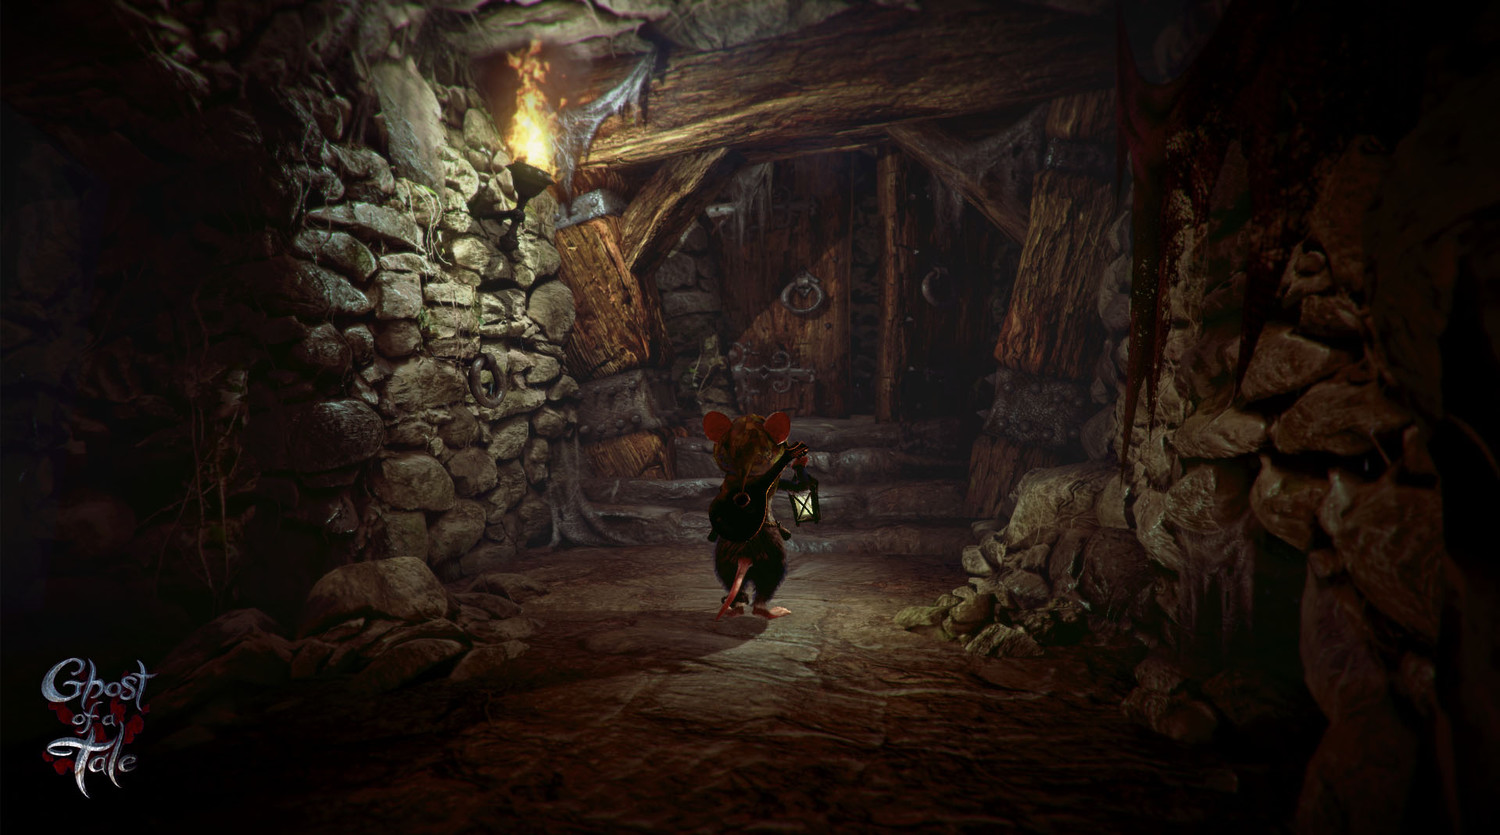 Скриншот 1 к игре Ghost of a Tale {v 7.91} (SeithCG) (RUS/ENG/MULTI6) [RePack] by xatab